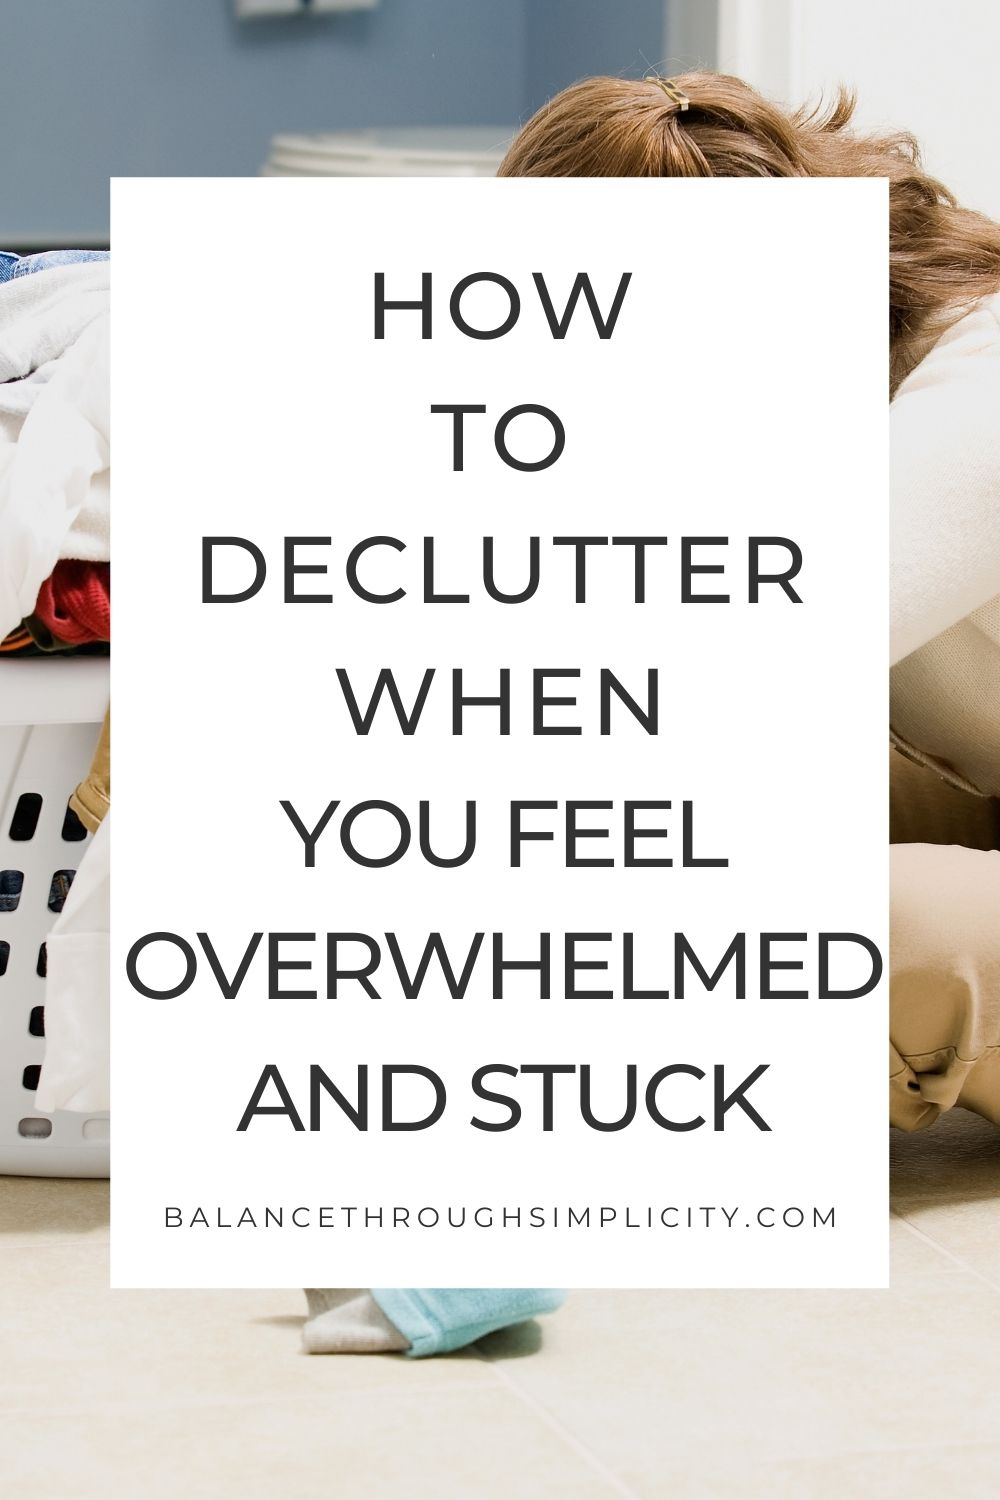 How to declutter when you feel overwhelmed